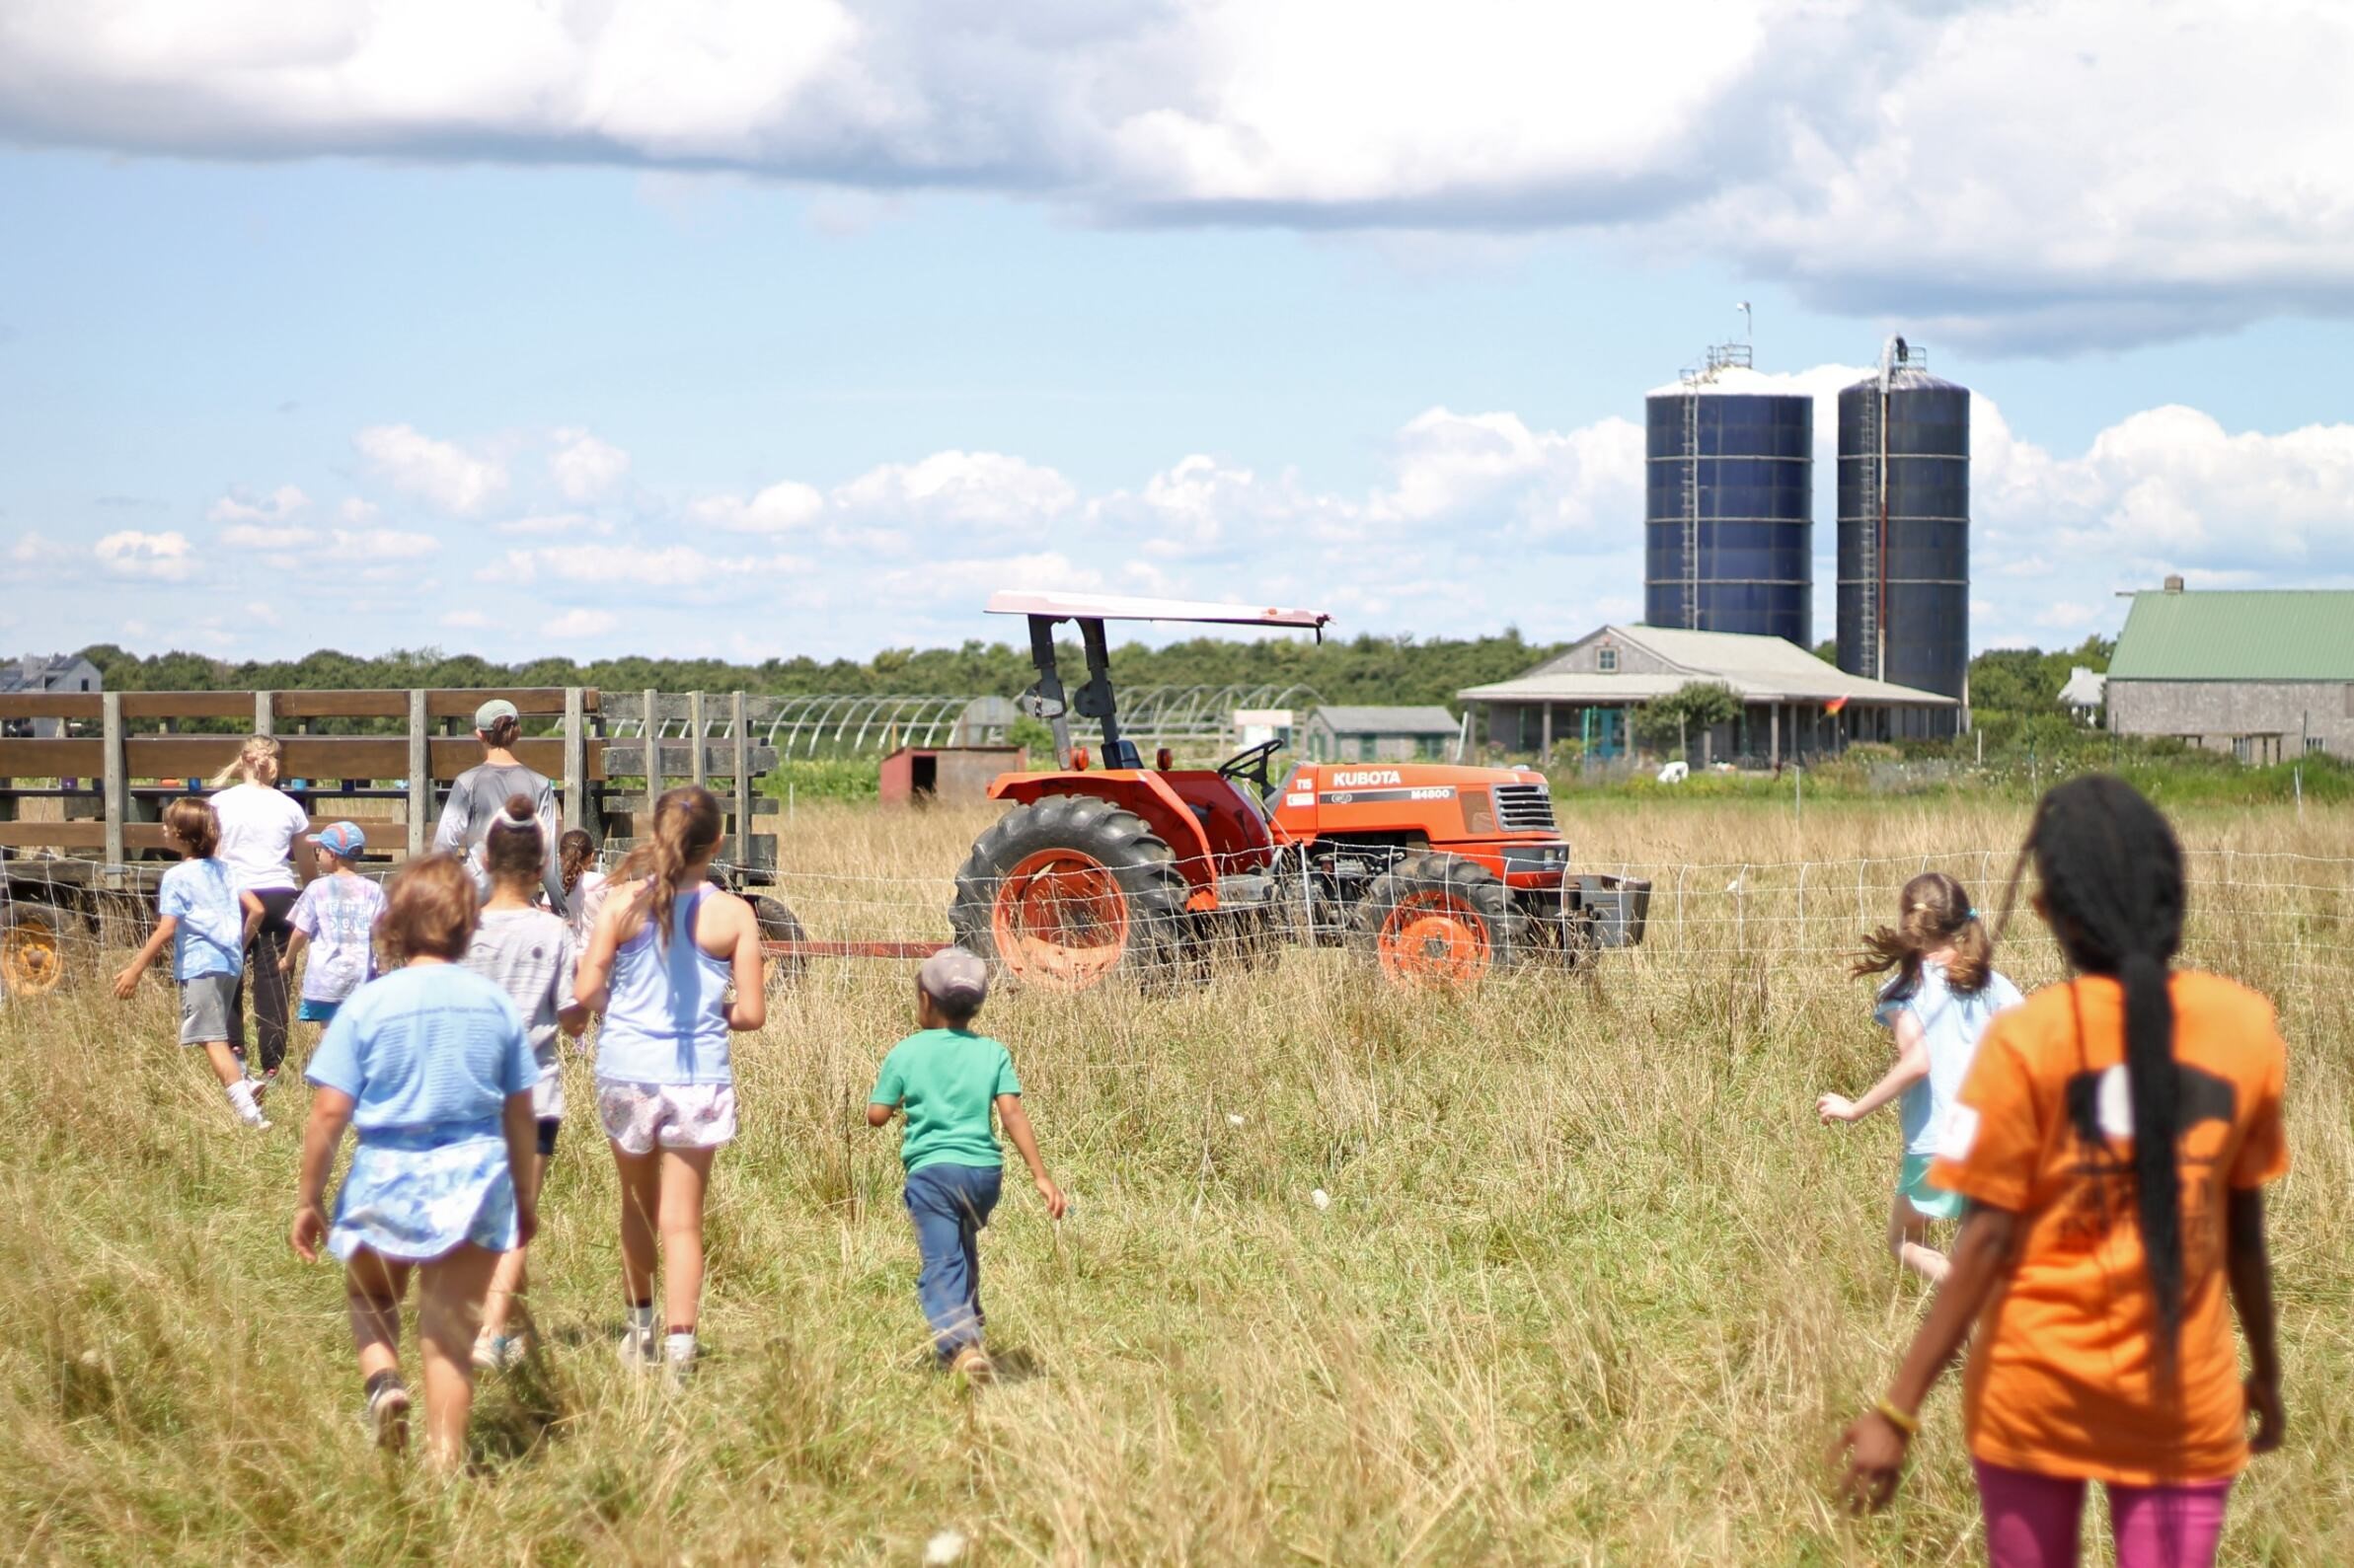 Campers stand near a tractor